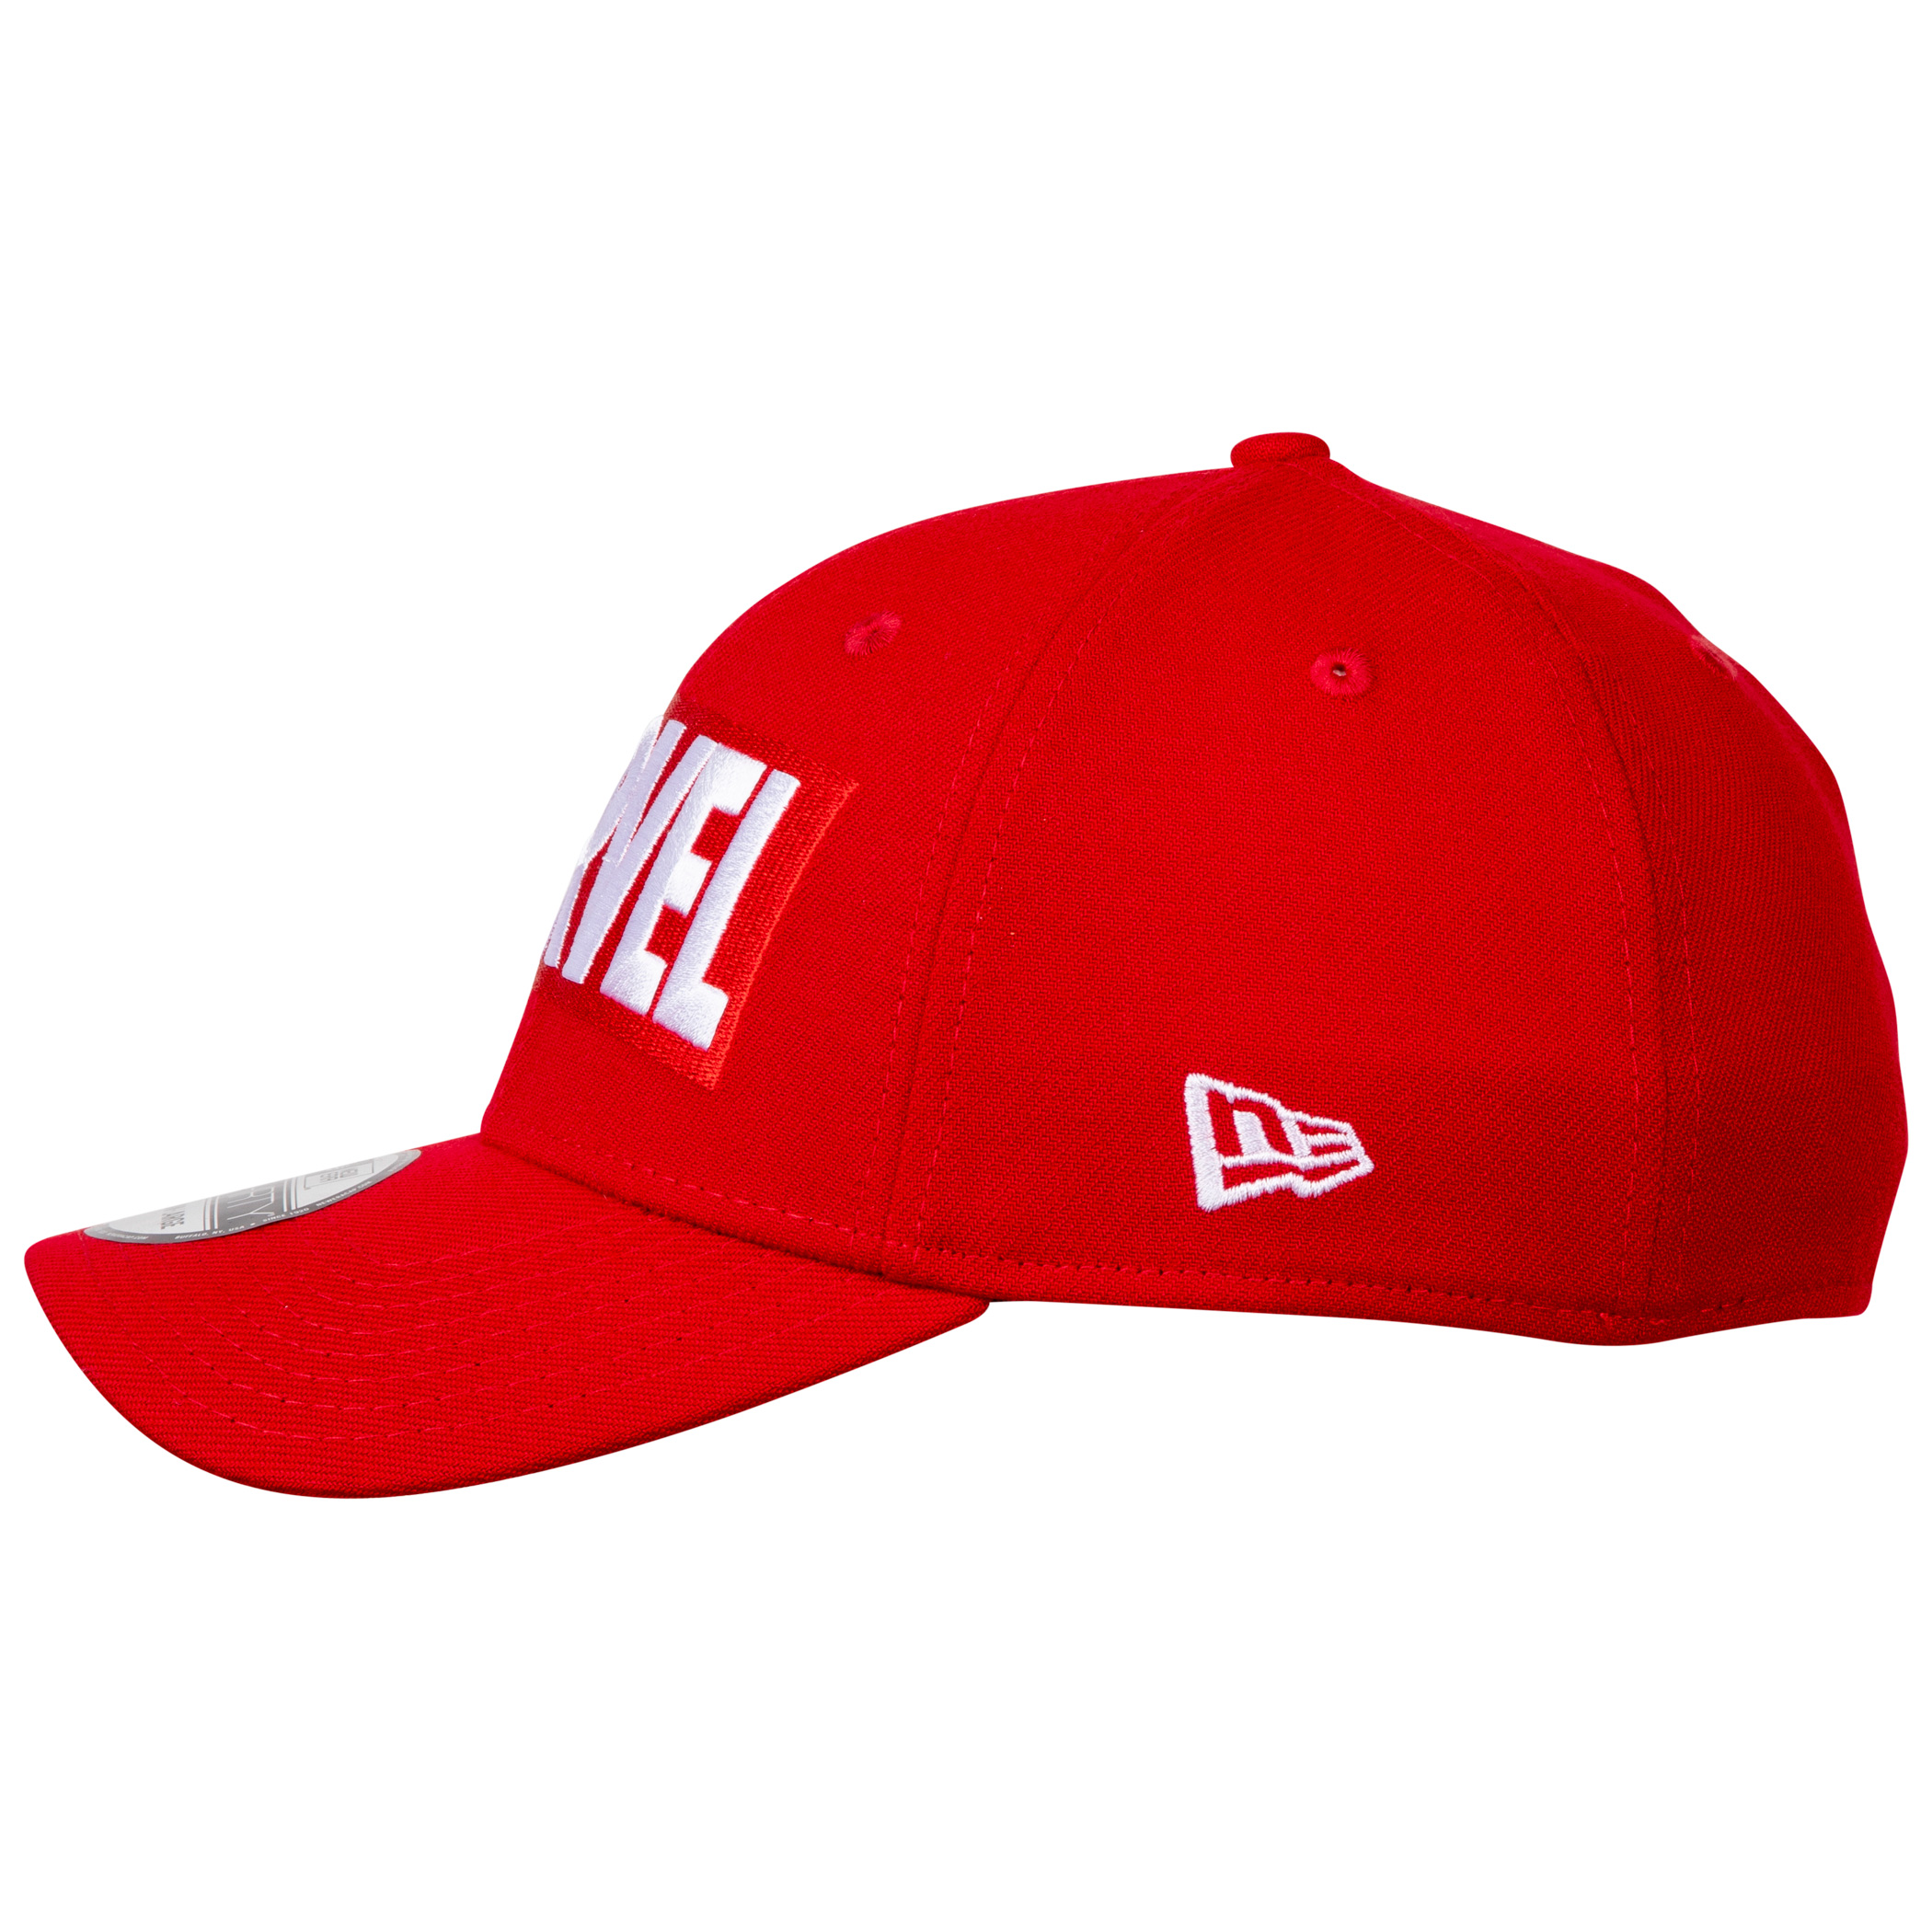 Marvel Brand Logo RED Label New Era 39Thirty Fitted Hat